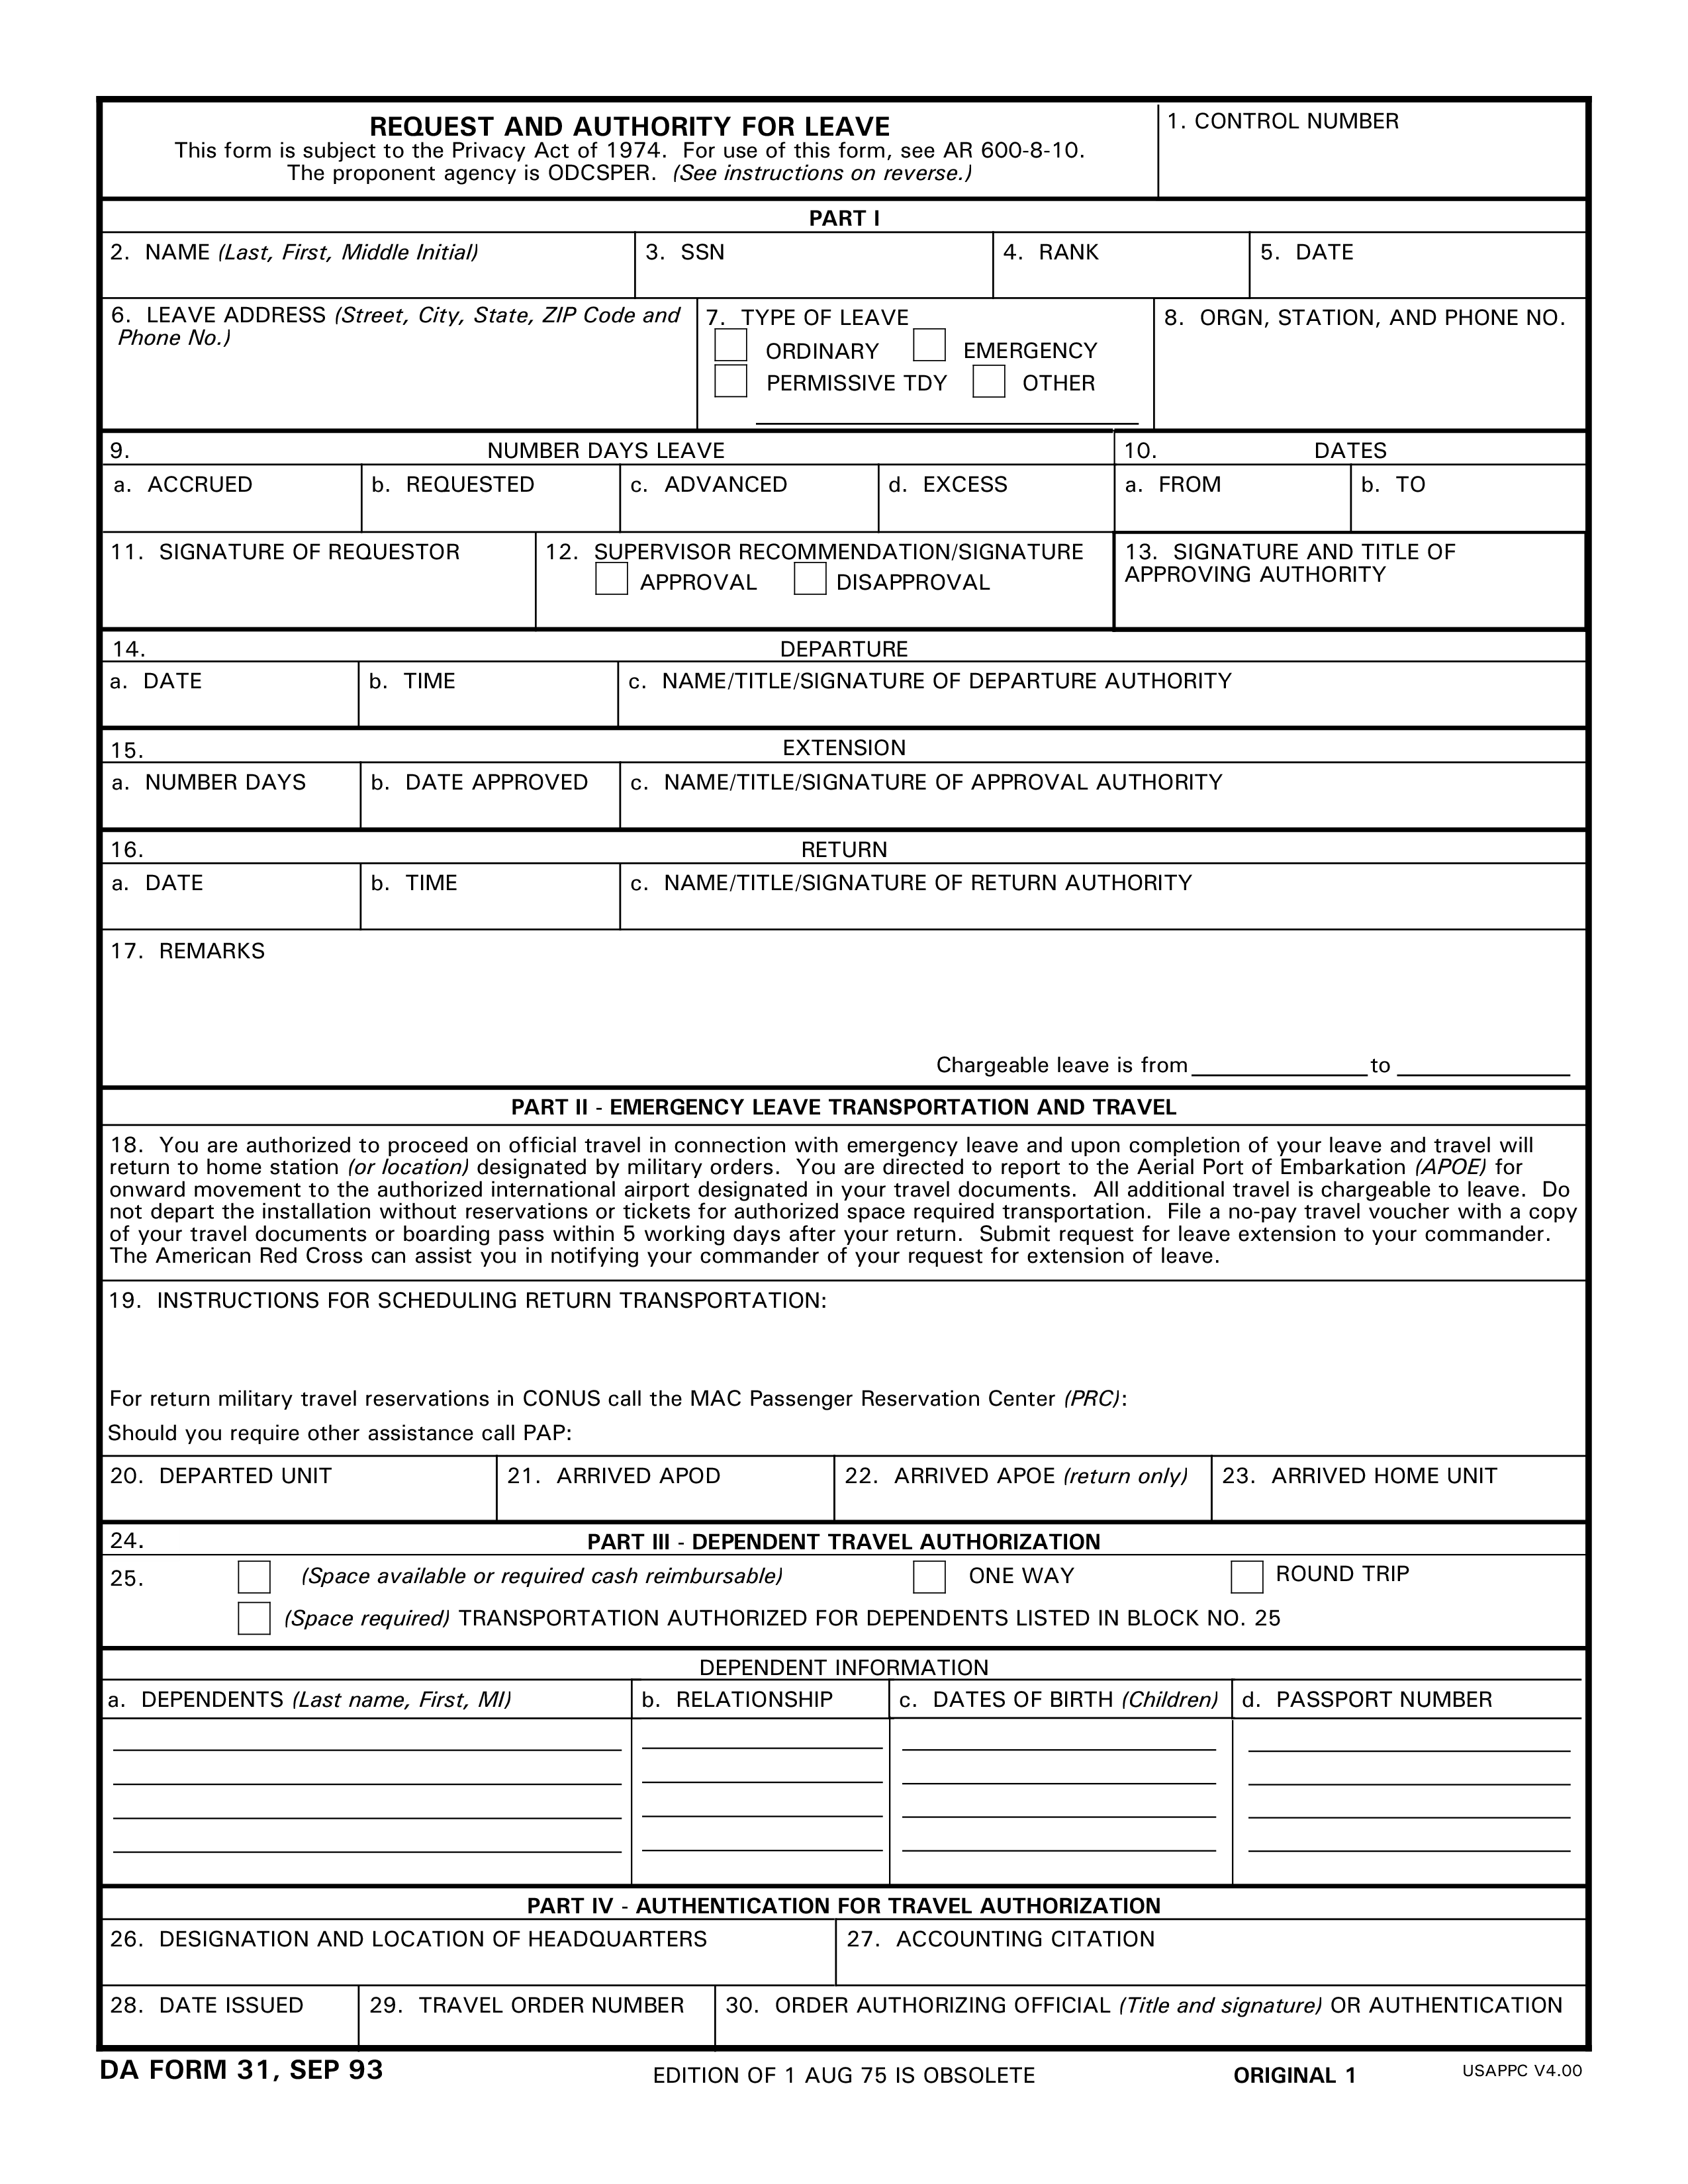 request and authority for leave form template plantilla imagen principal